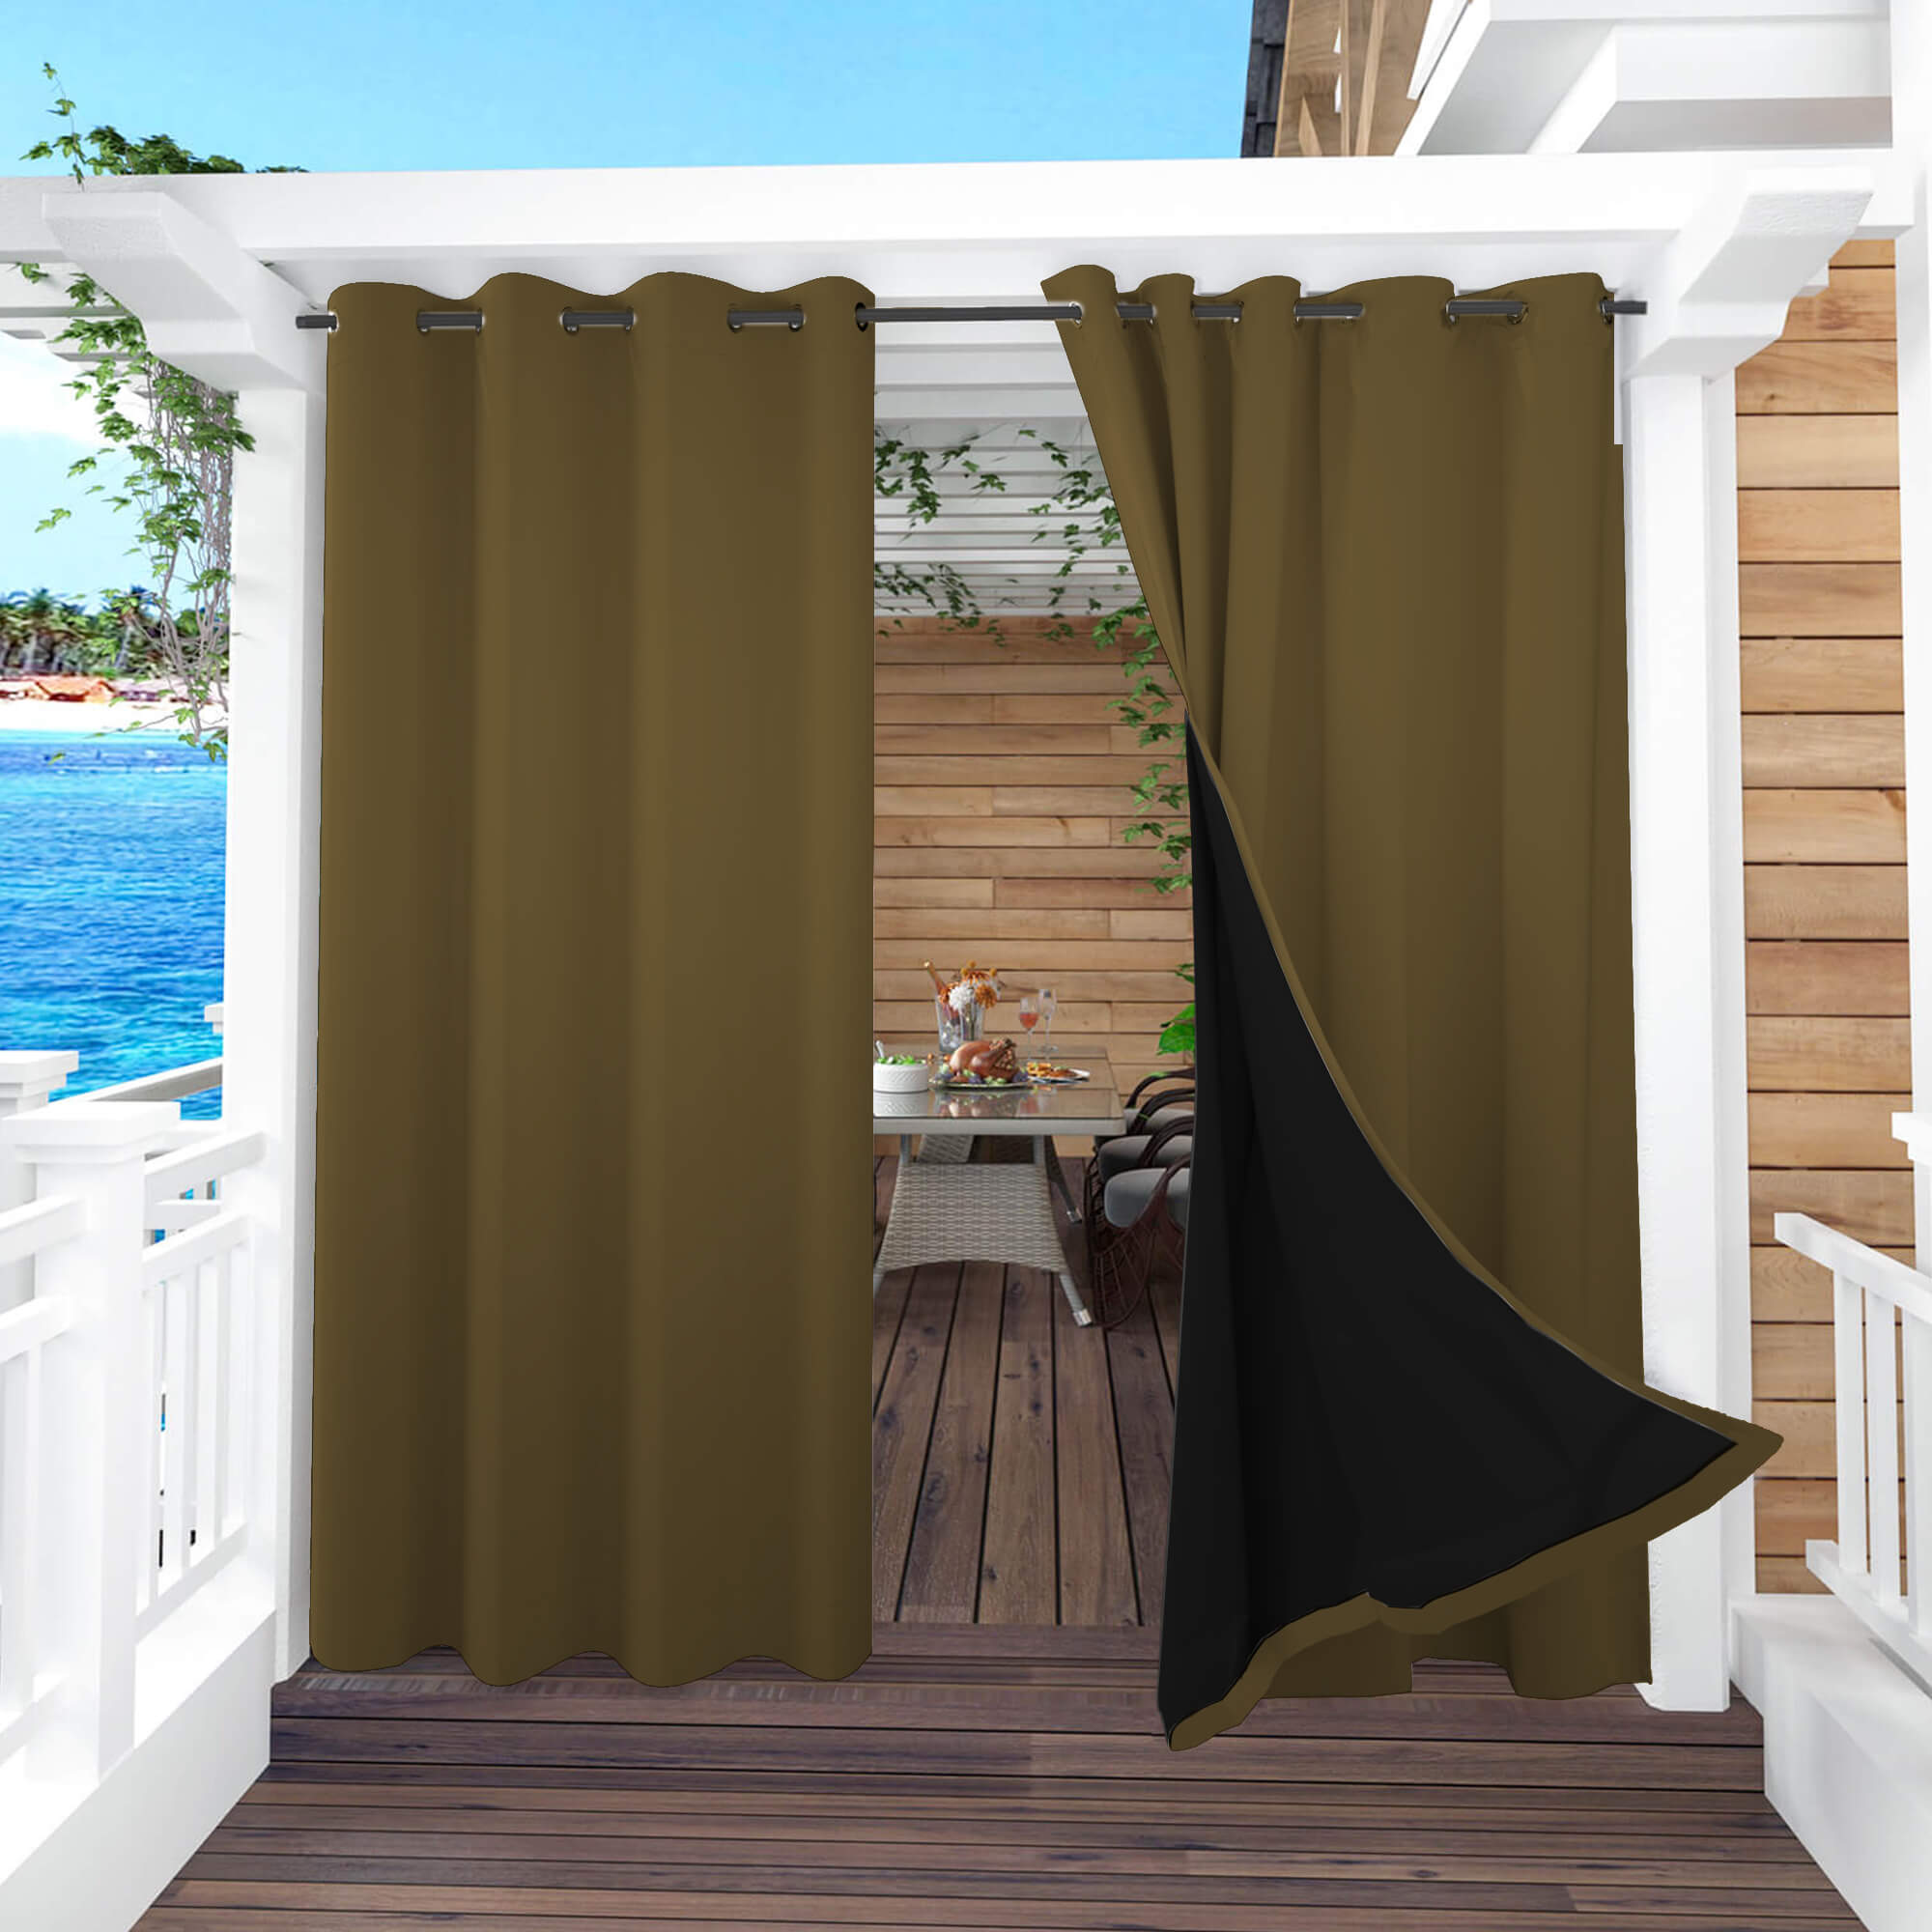 Snowcity Thermal Curtains/Drapes 1 Panel Coffee | Waterproof Curtains Grommet/Tab Top | Custom Blackout Curtains